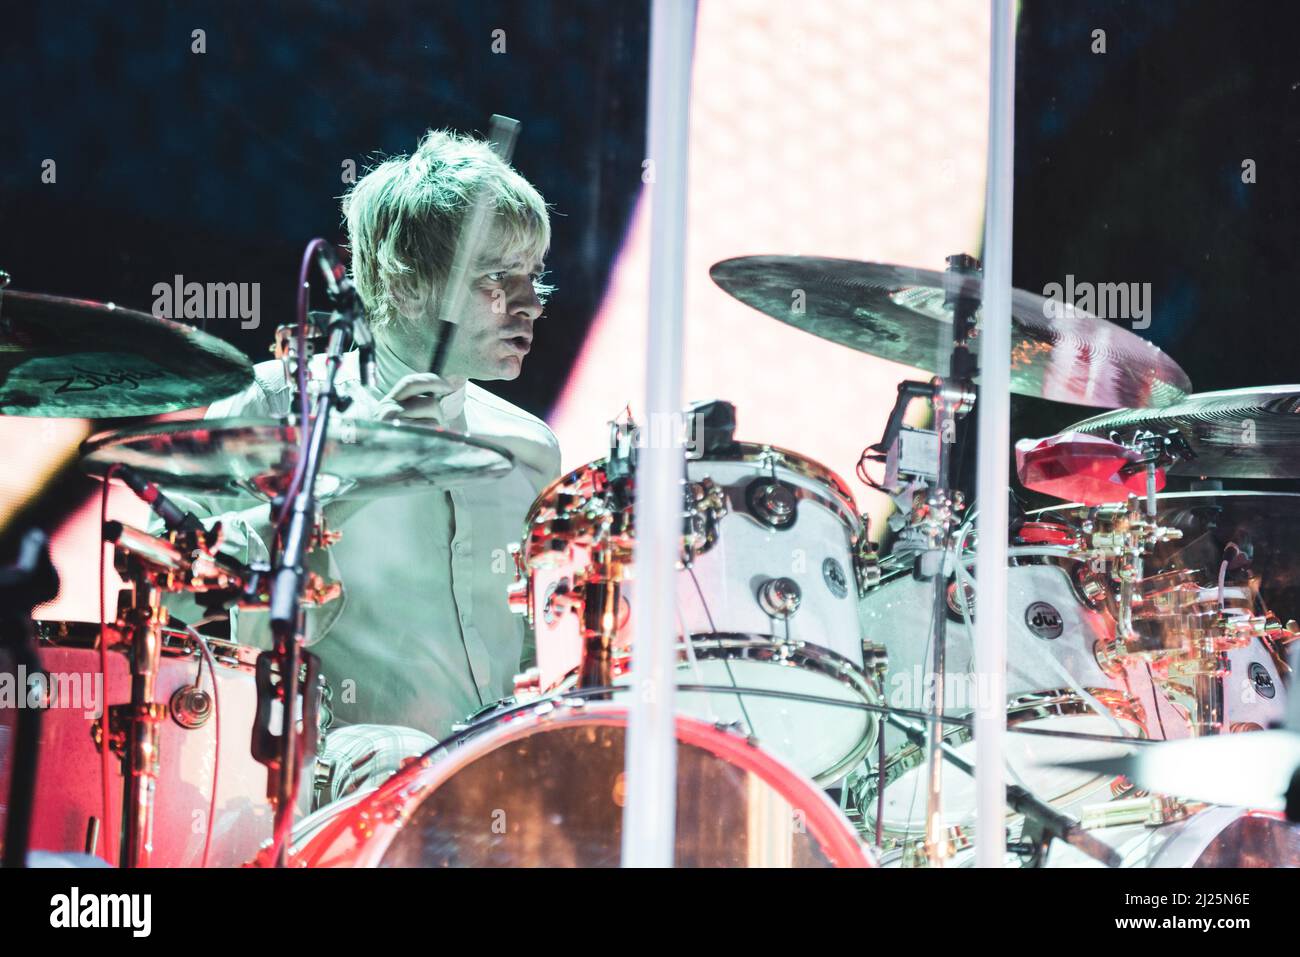 ITALY, BOLOGNA, UNIPOL ARENA 2016: Zak Starkey, drummer of the British rock band “The Who”, performing live on stage for the “Back to the Who” European tour Stock Photo